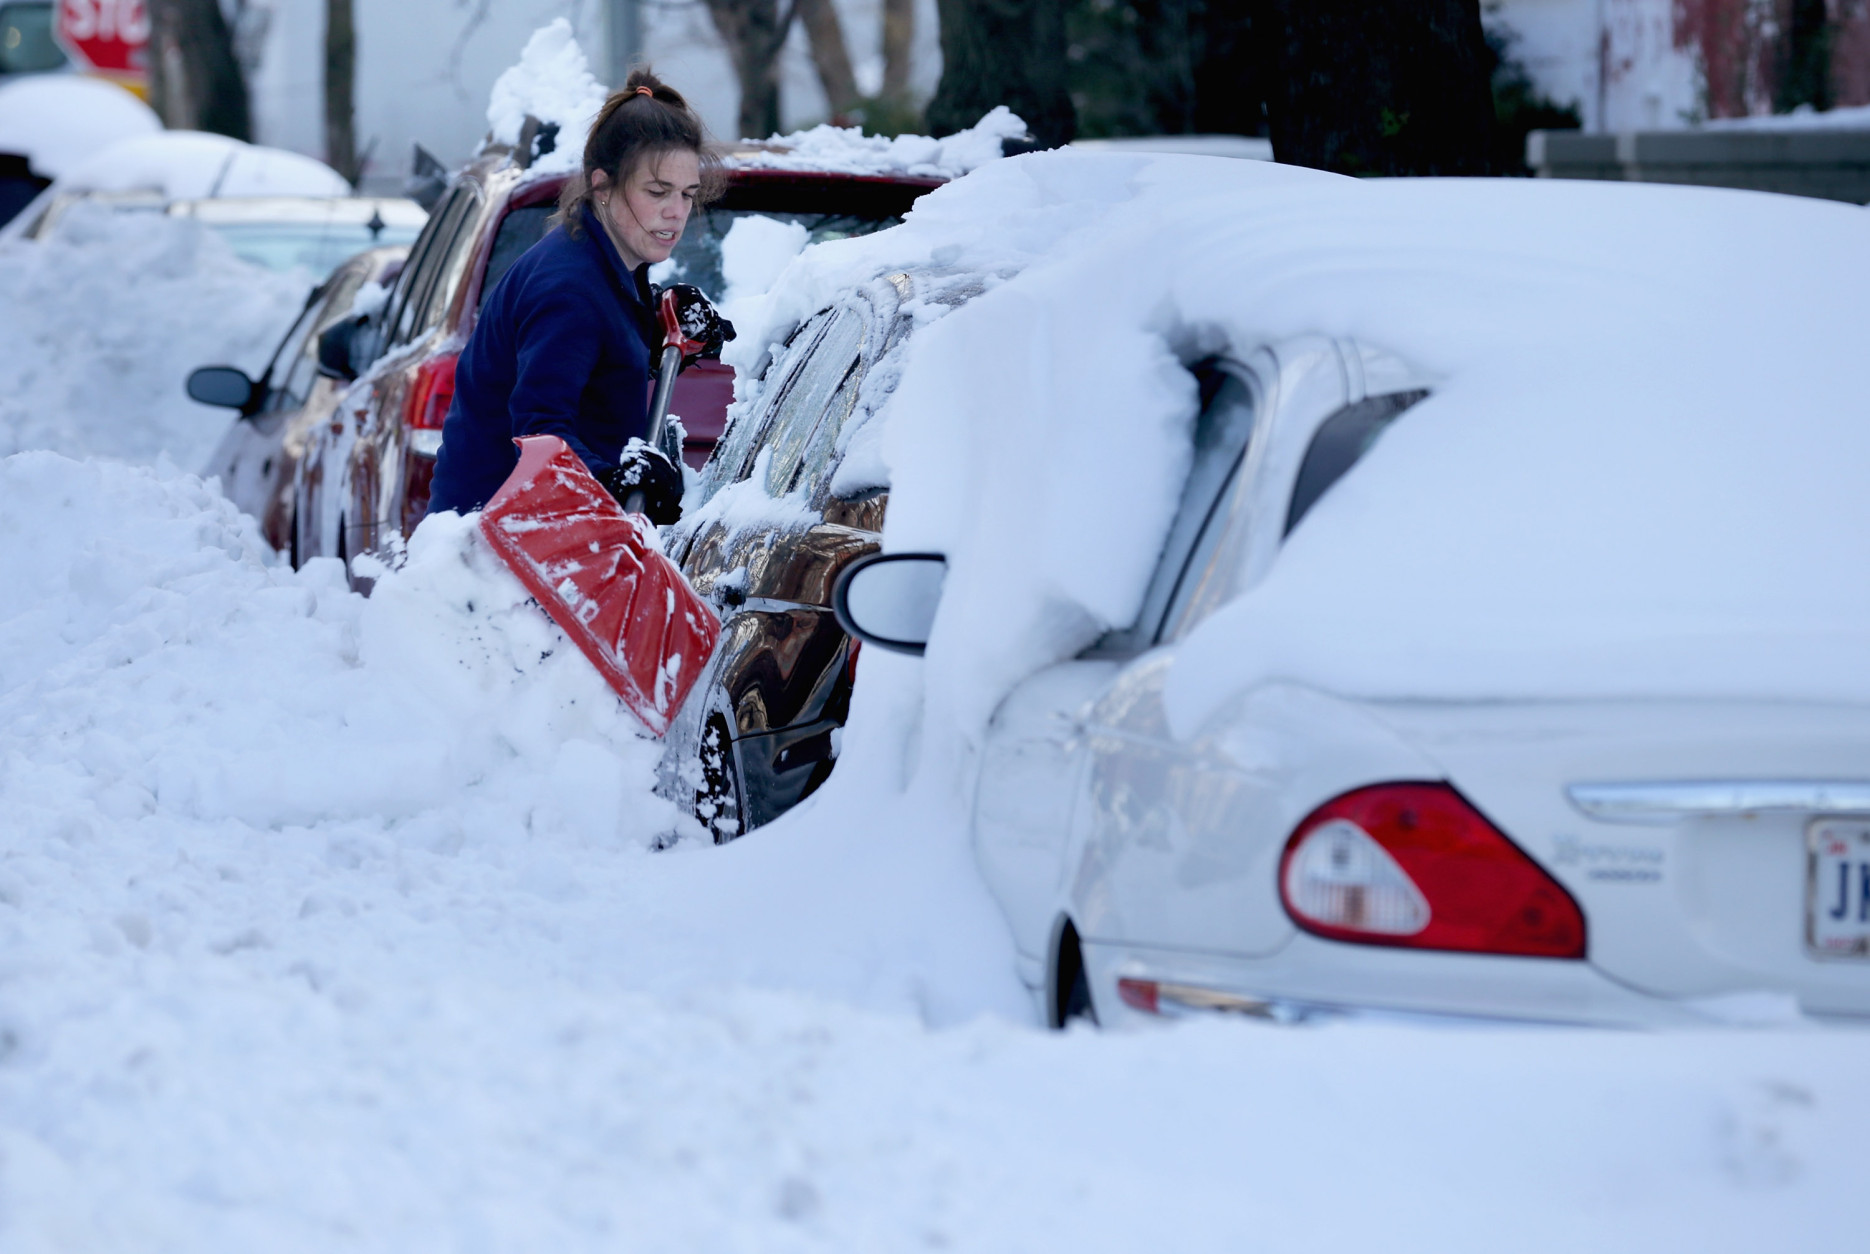 WASHINGTON, DC - JANUARY 25:  Residents of the Capitol Hill neighborhood work to clean snow off their cars after Winter Storm Jonas covered the region with more than two feet of snow January 25, 2016 in Washington, United States. The storm hit the East Coast over the weekend, breaking snowfall records, causing 29 storm-related deaths, leaving thousands of homes without power and serious flooding in coastal areas.  (Photo by Chip Somodevilla/Getty Images)